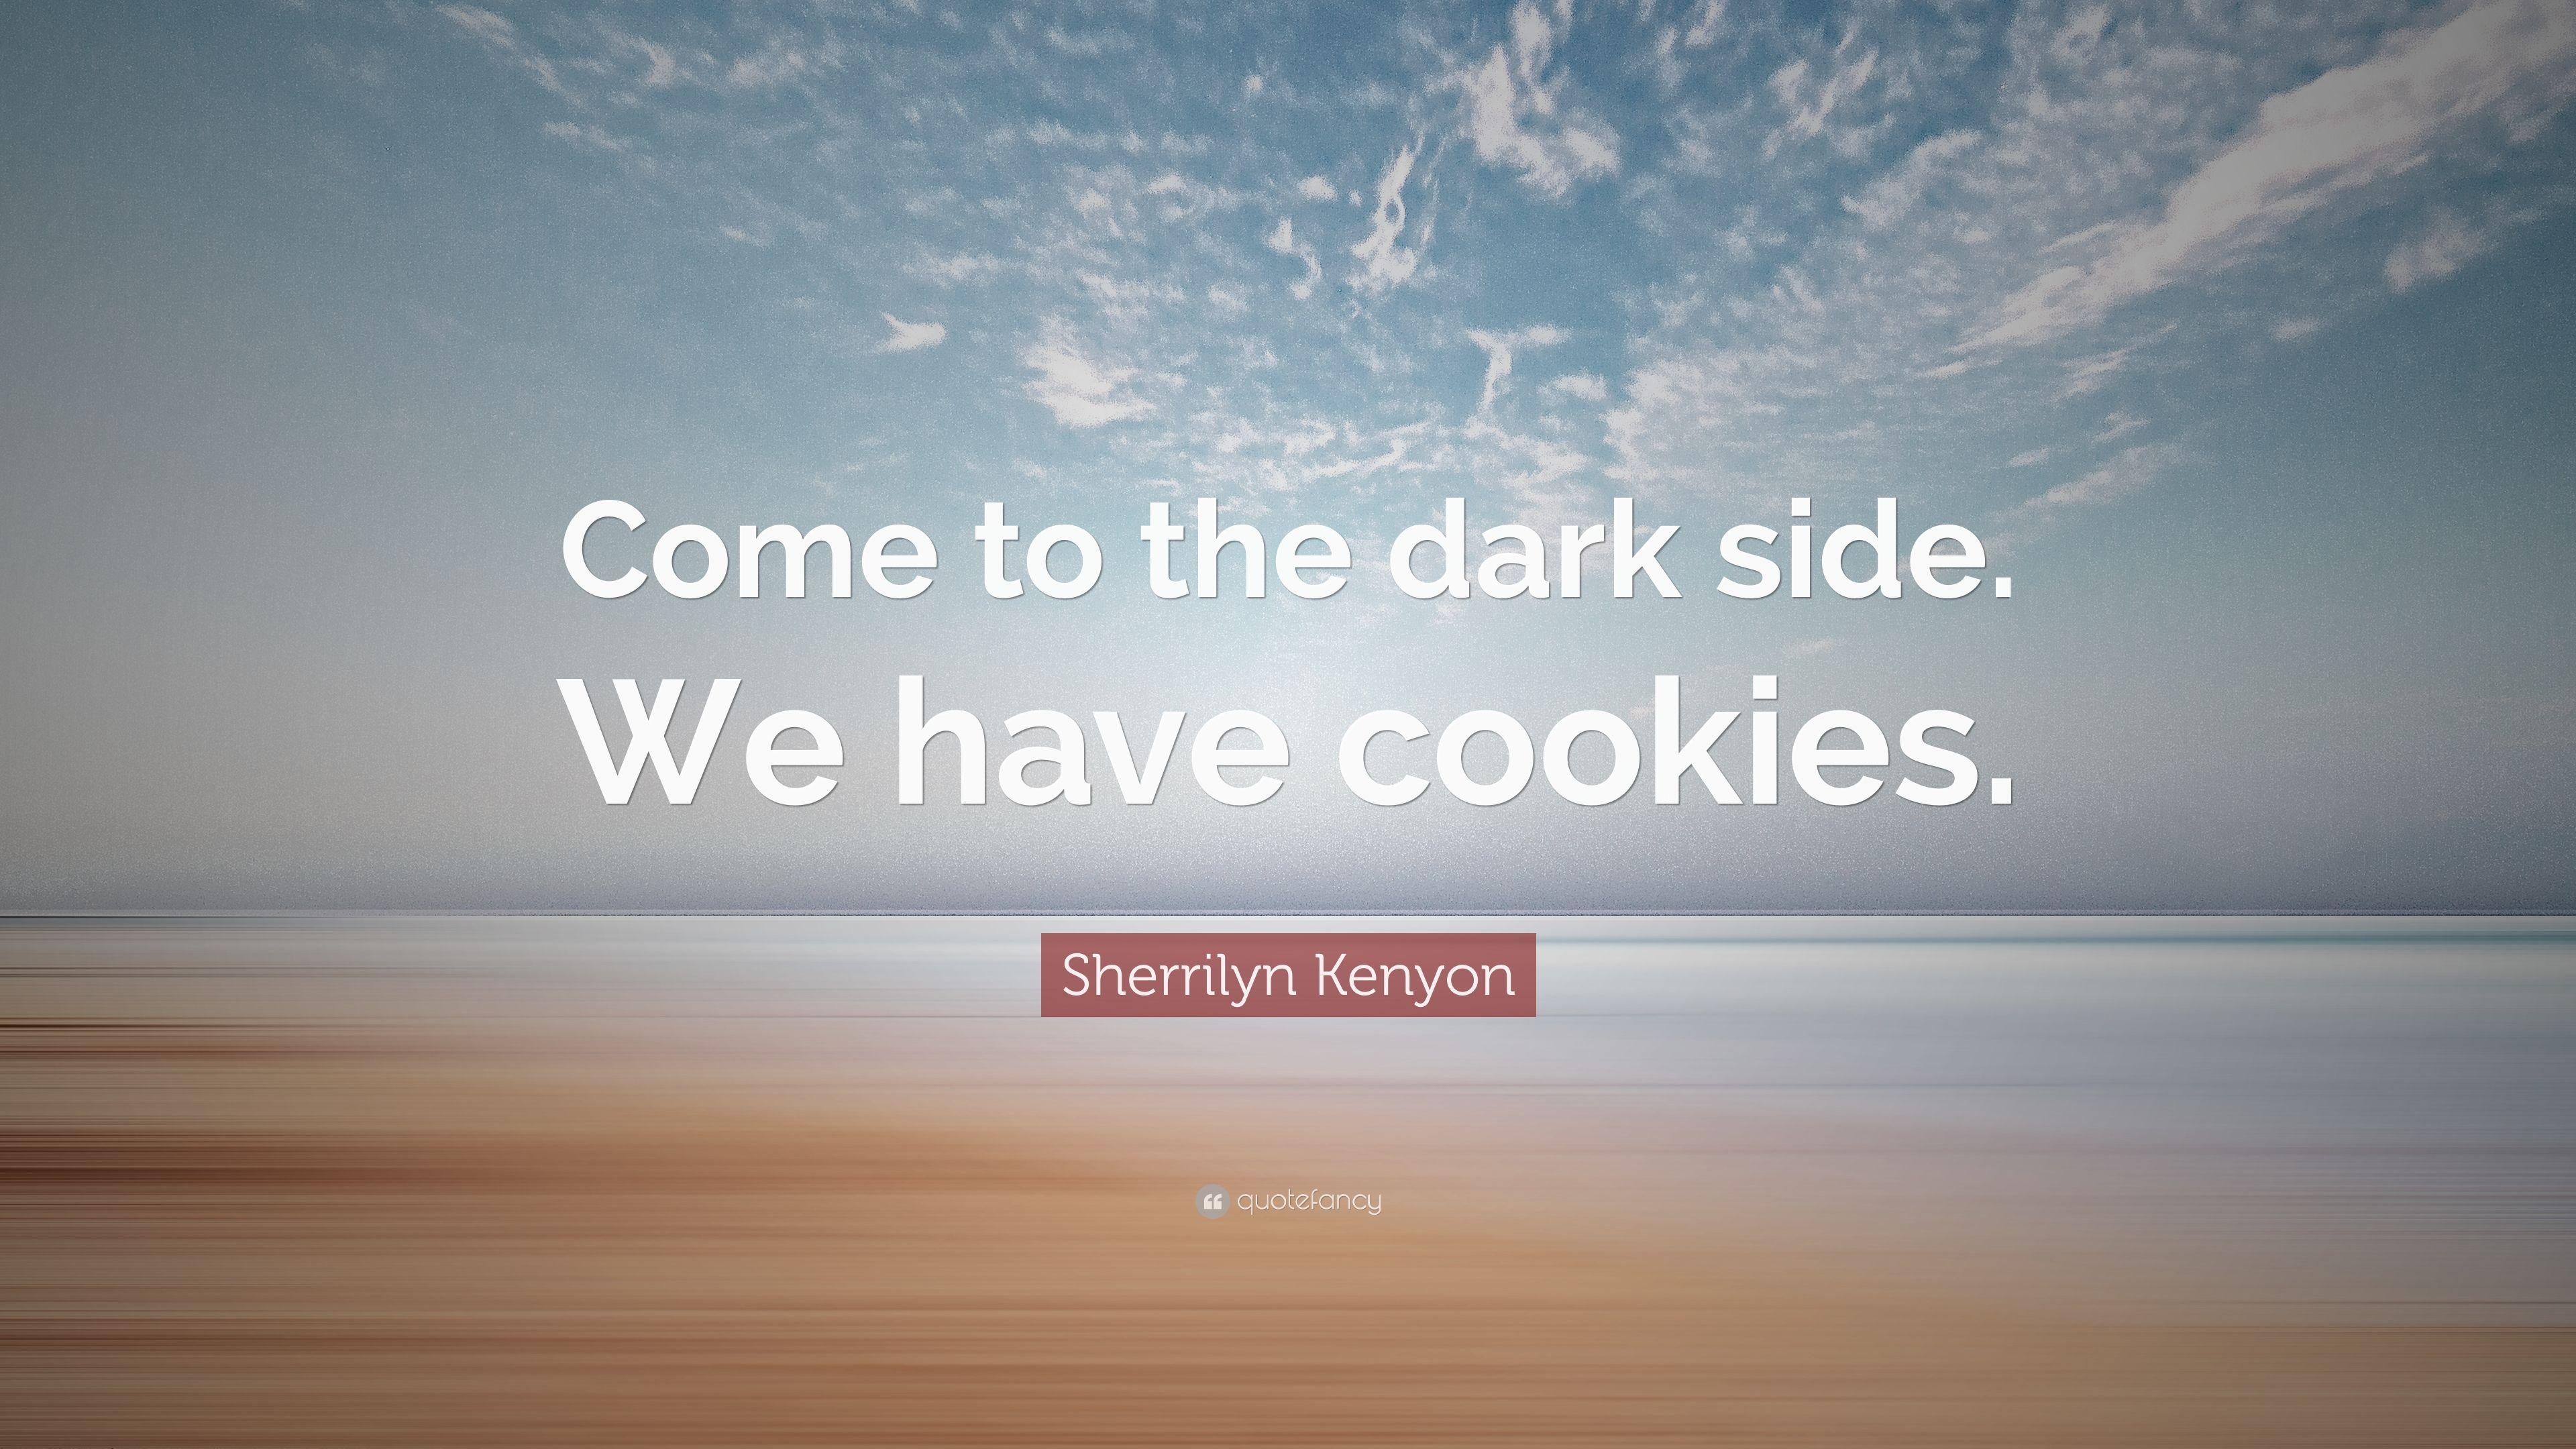 Sherrilyn Kenyon Quote: “Come to the dark side. We have